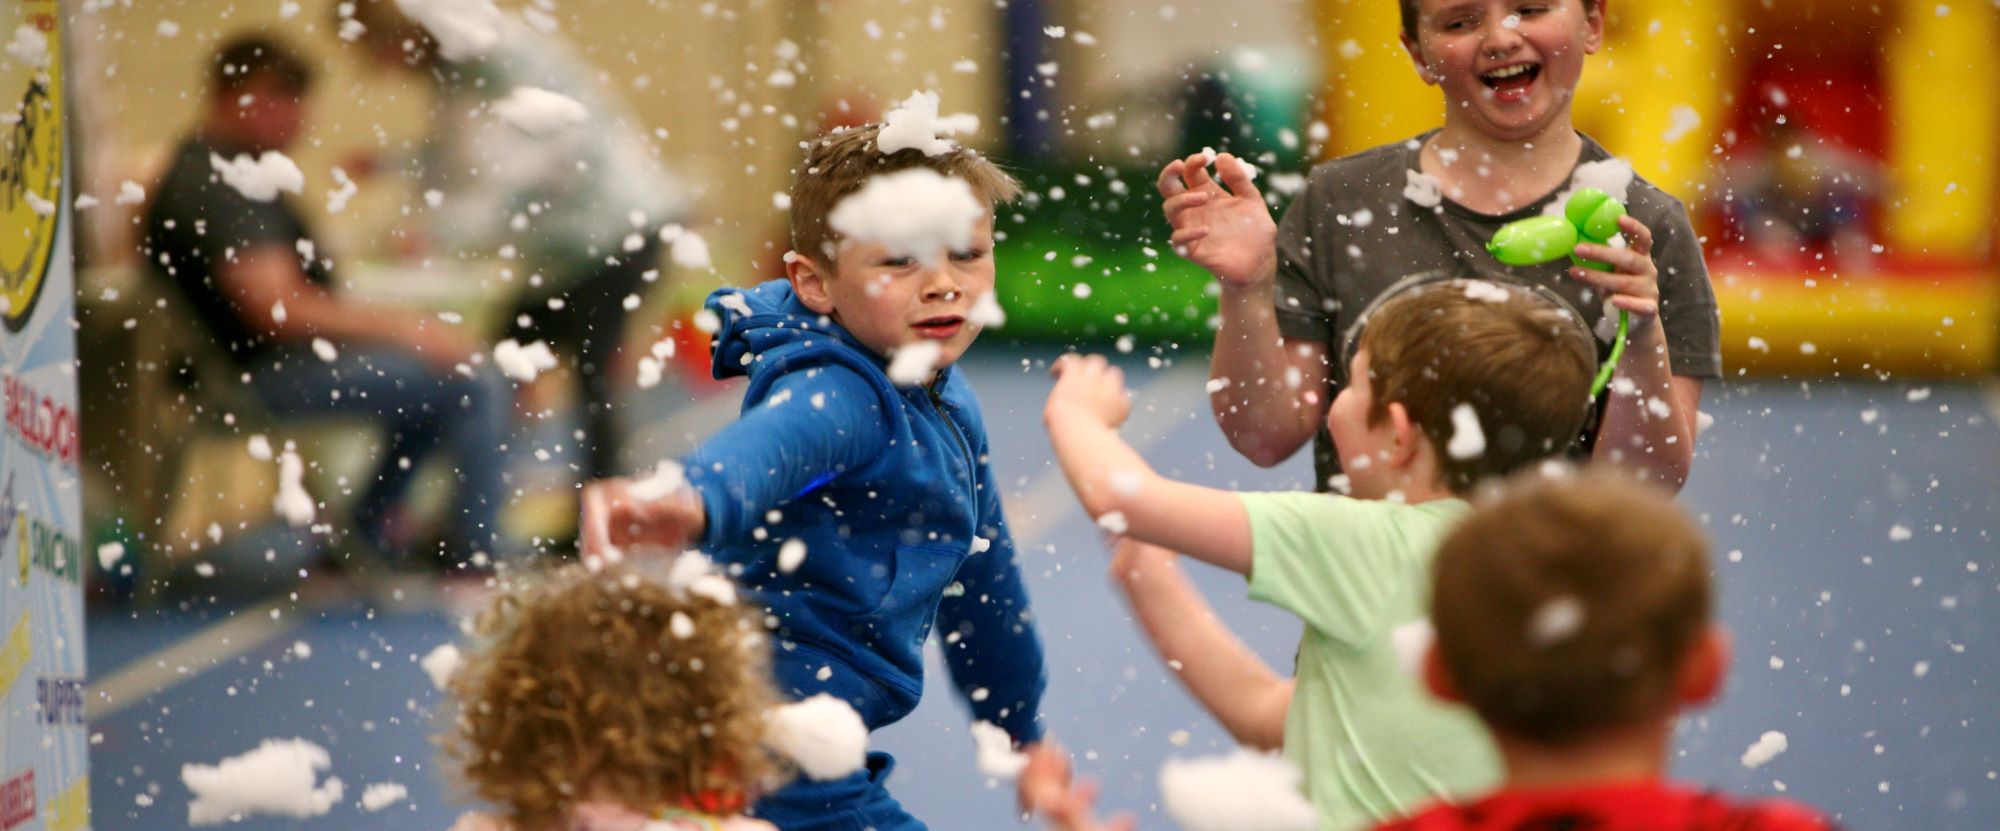 A group of children are at a party at a sports centre. They are trying to catch some fake snow made from a snow machine. They are enjoying themselves.